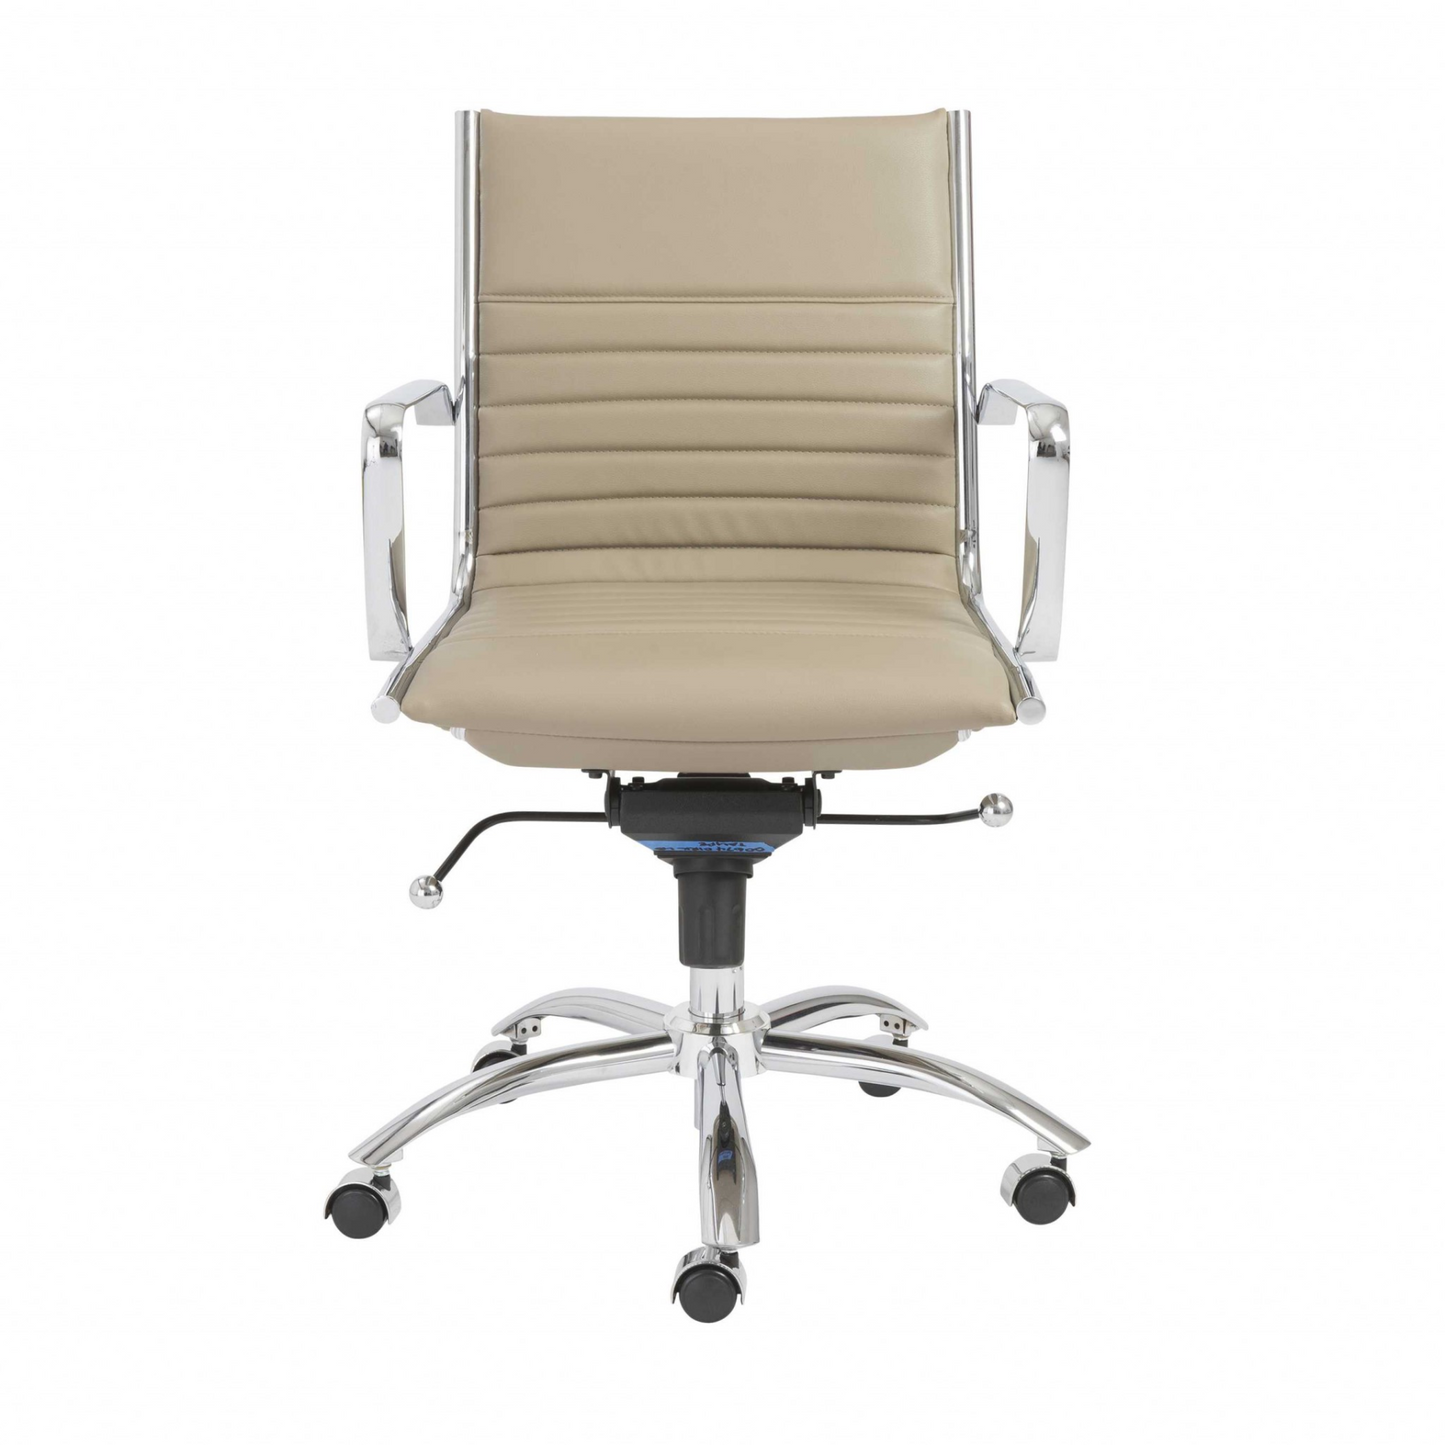 Low Back Ribbed Office Chair with Chromed Steel Base - Taupe